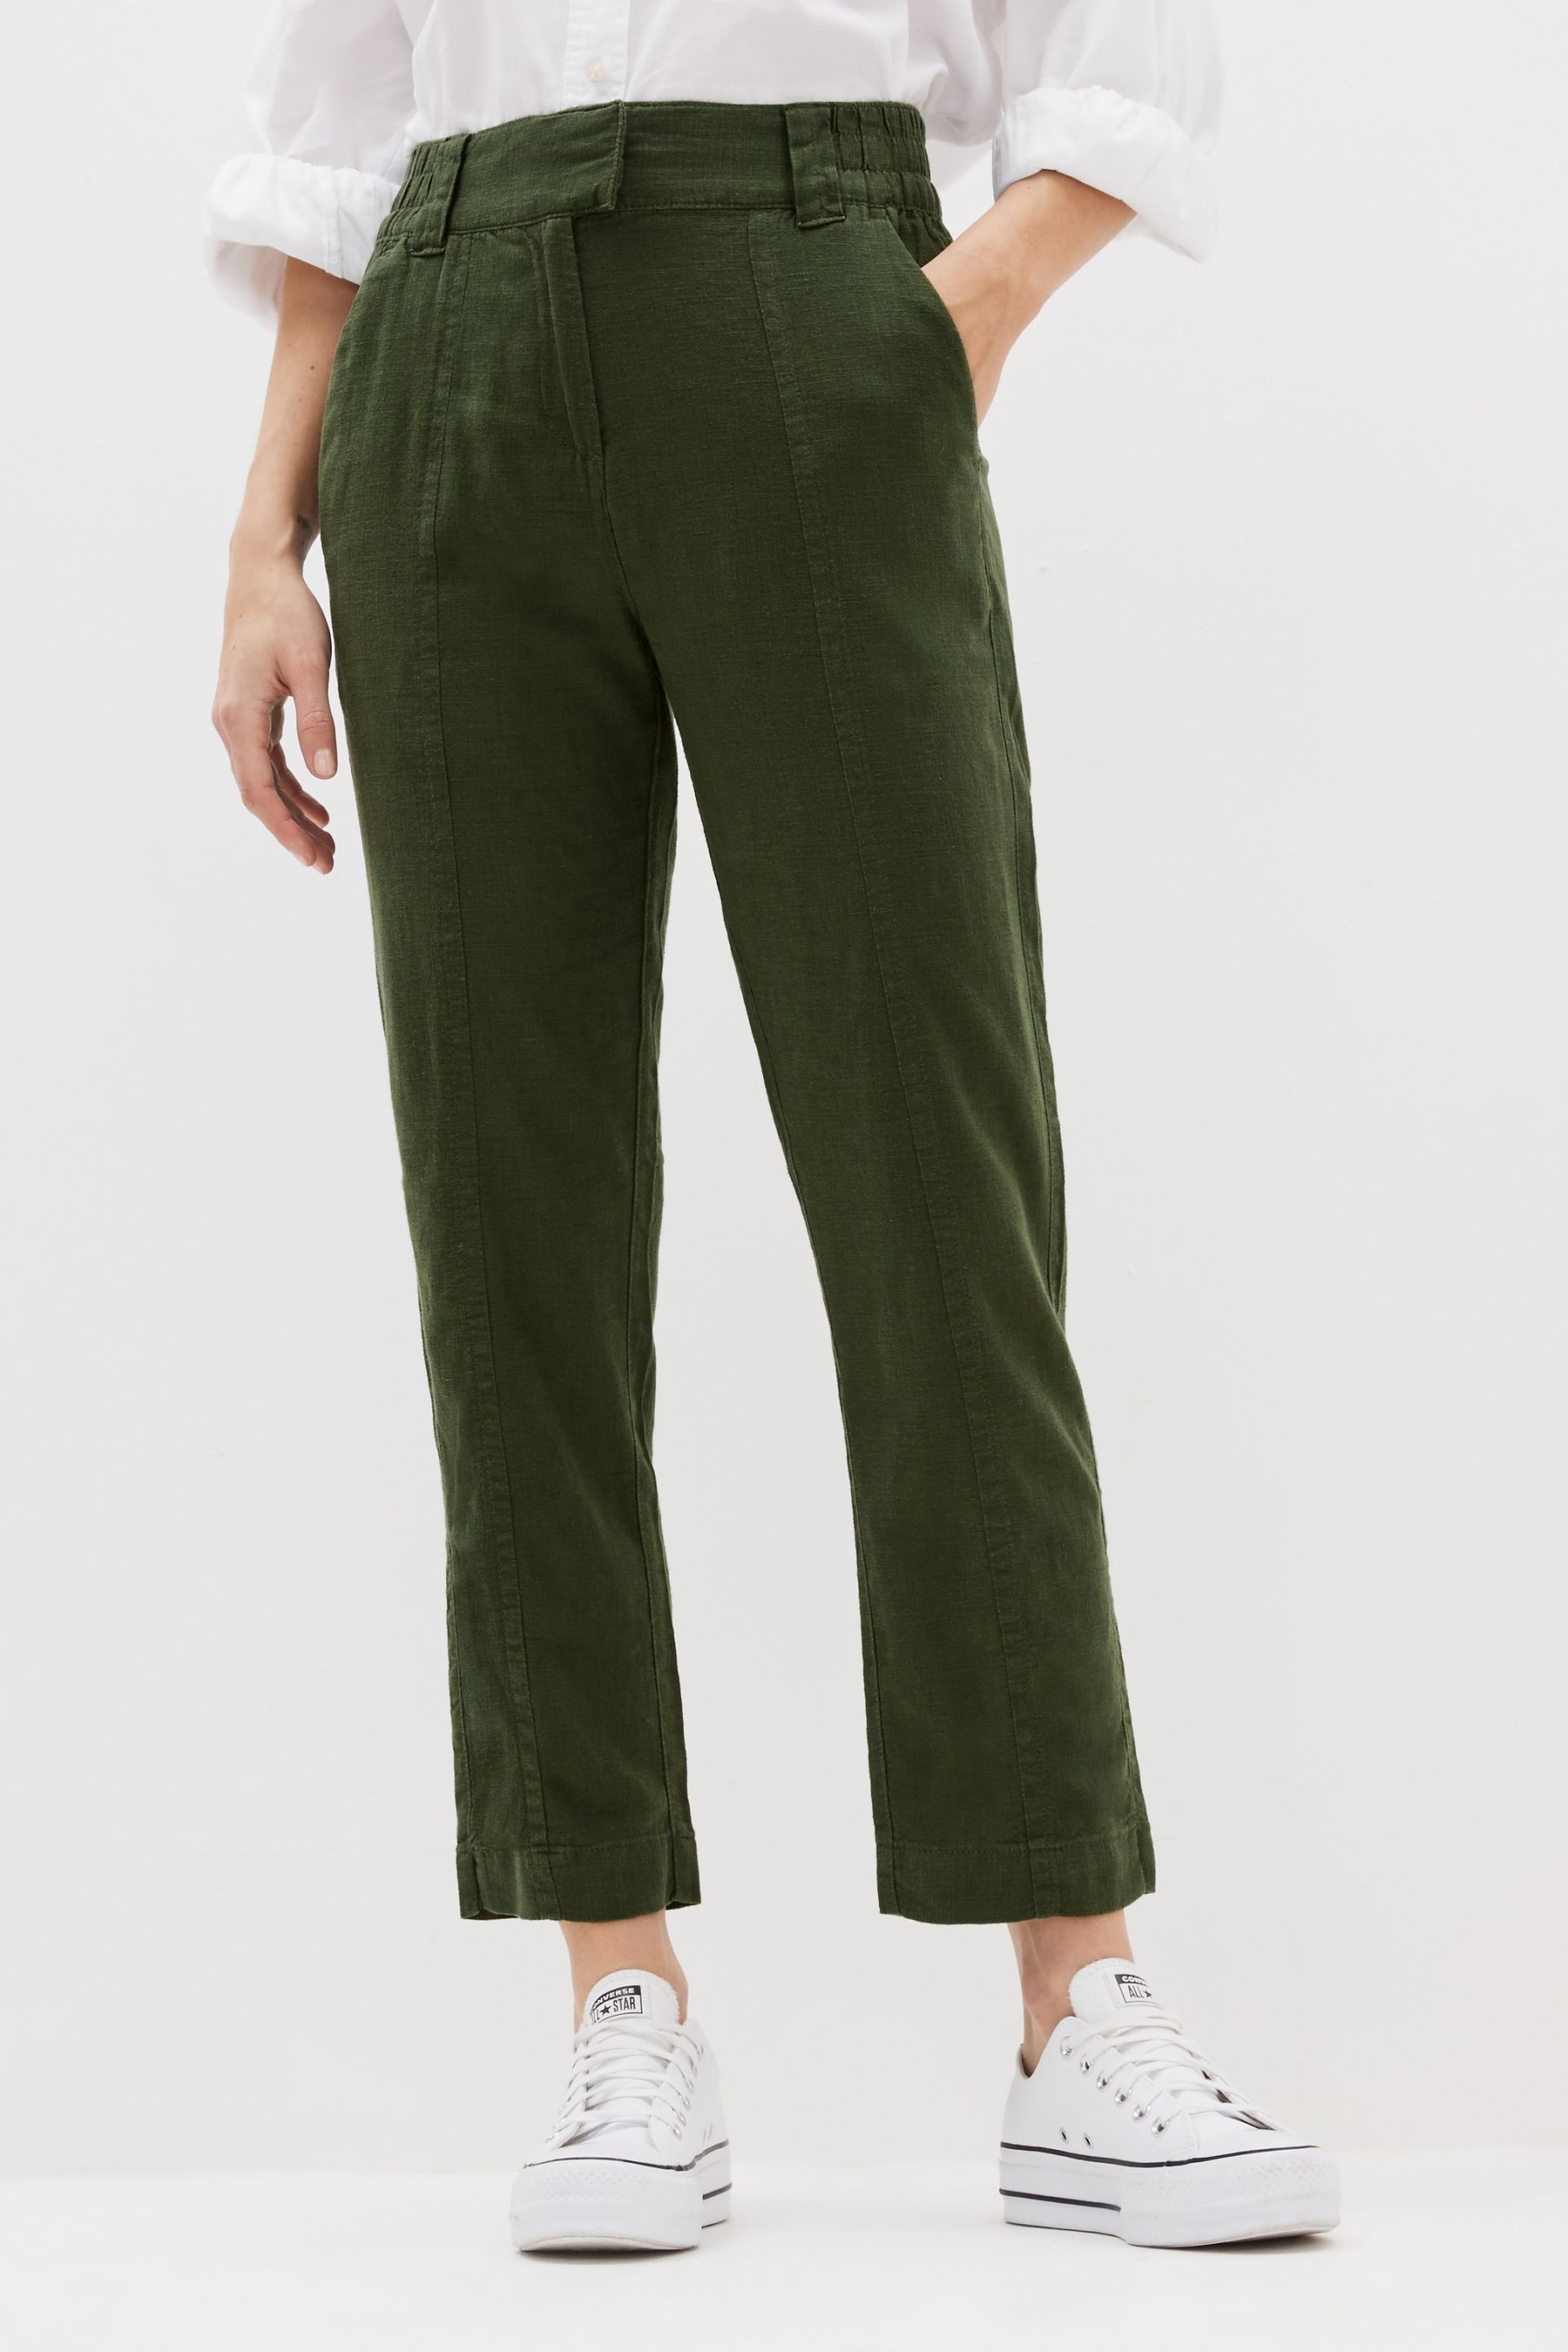 Buy Linen Blend Taper Trousers from Next Ireland